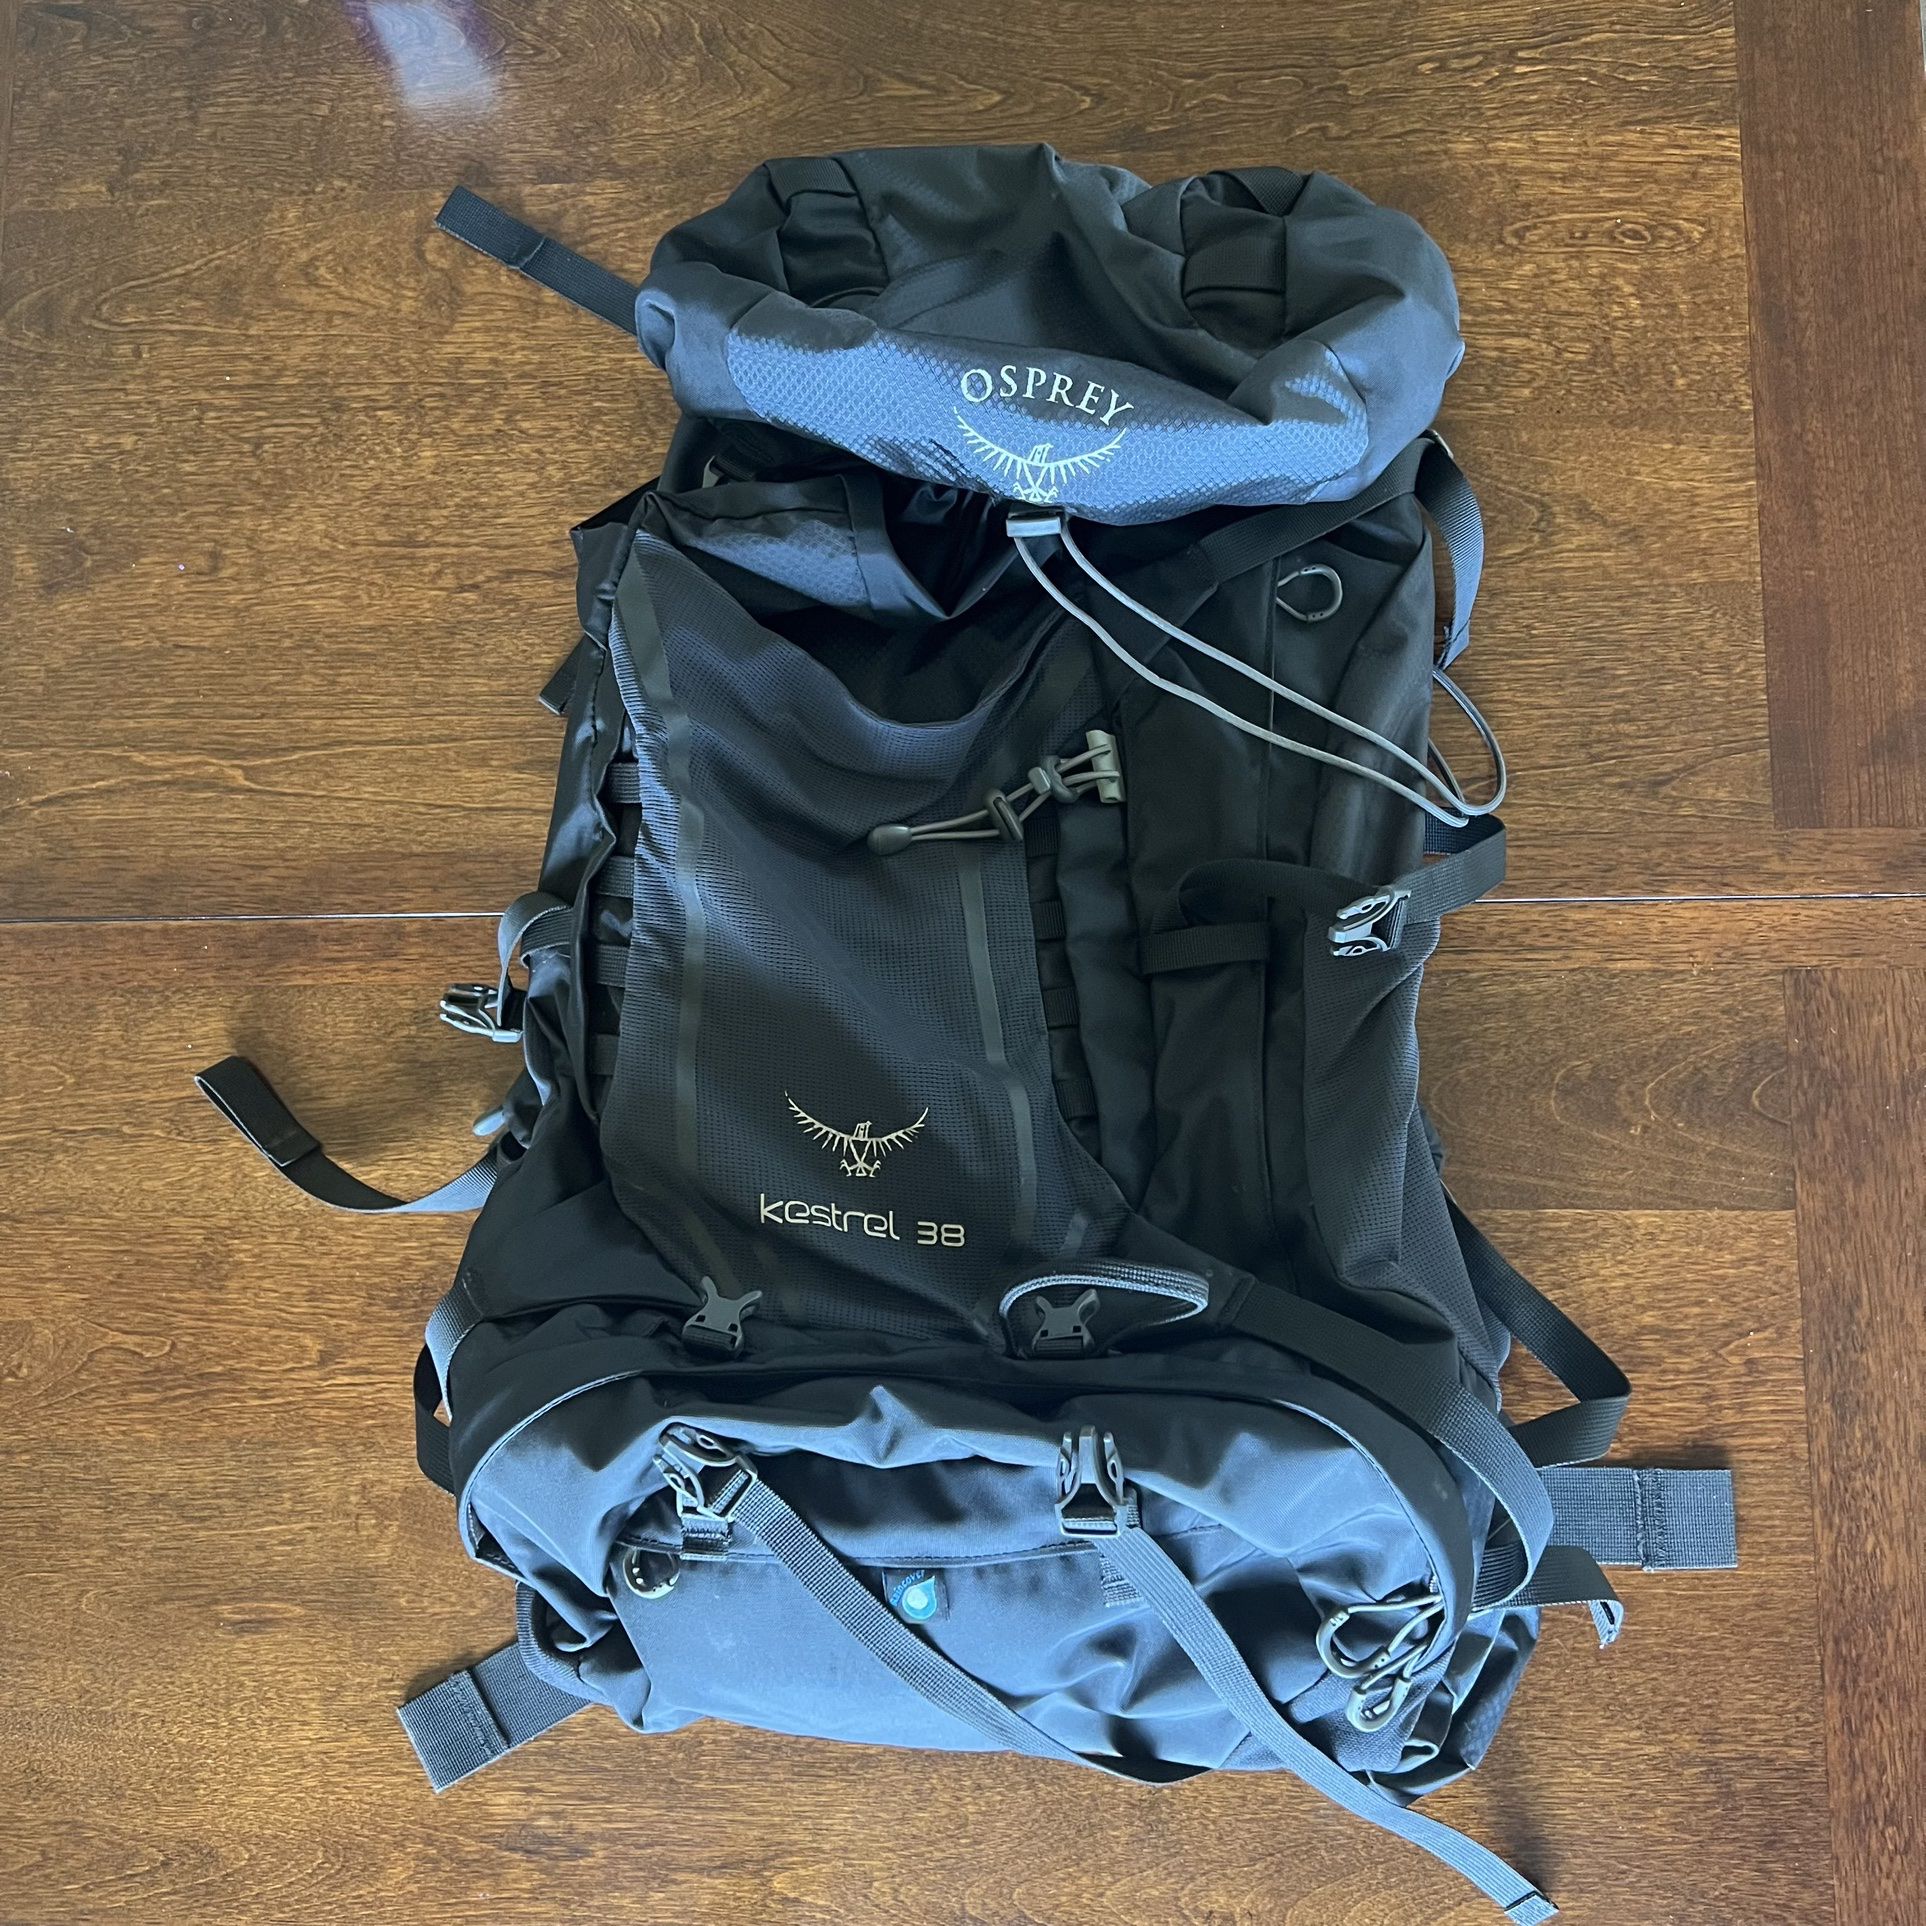 Blaast op piek Haven Osprey Kestrel 38 Backpacking Backpack - Comes With Osprey Rainfly -  Lightweight Used Once for Sale in South San Francisco, CA - OfferUp